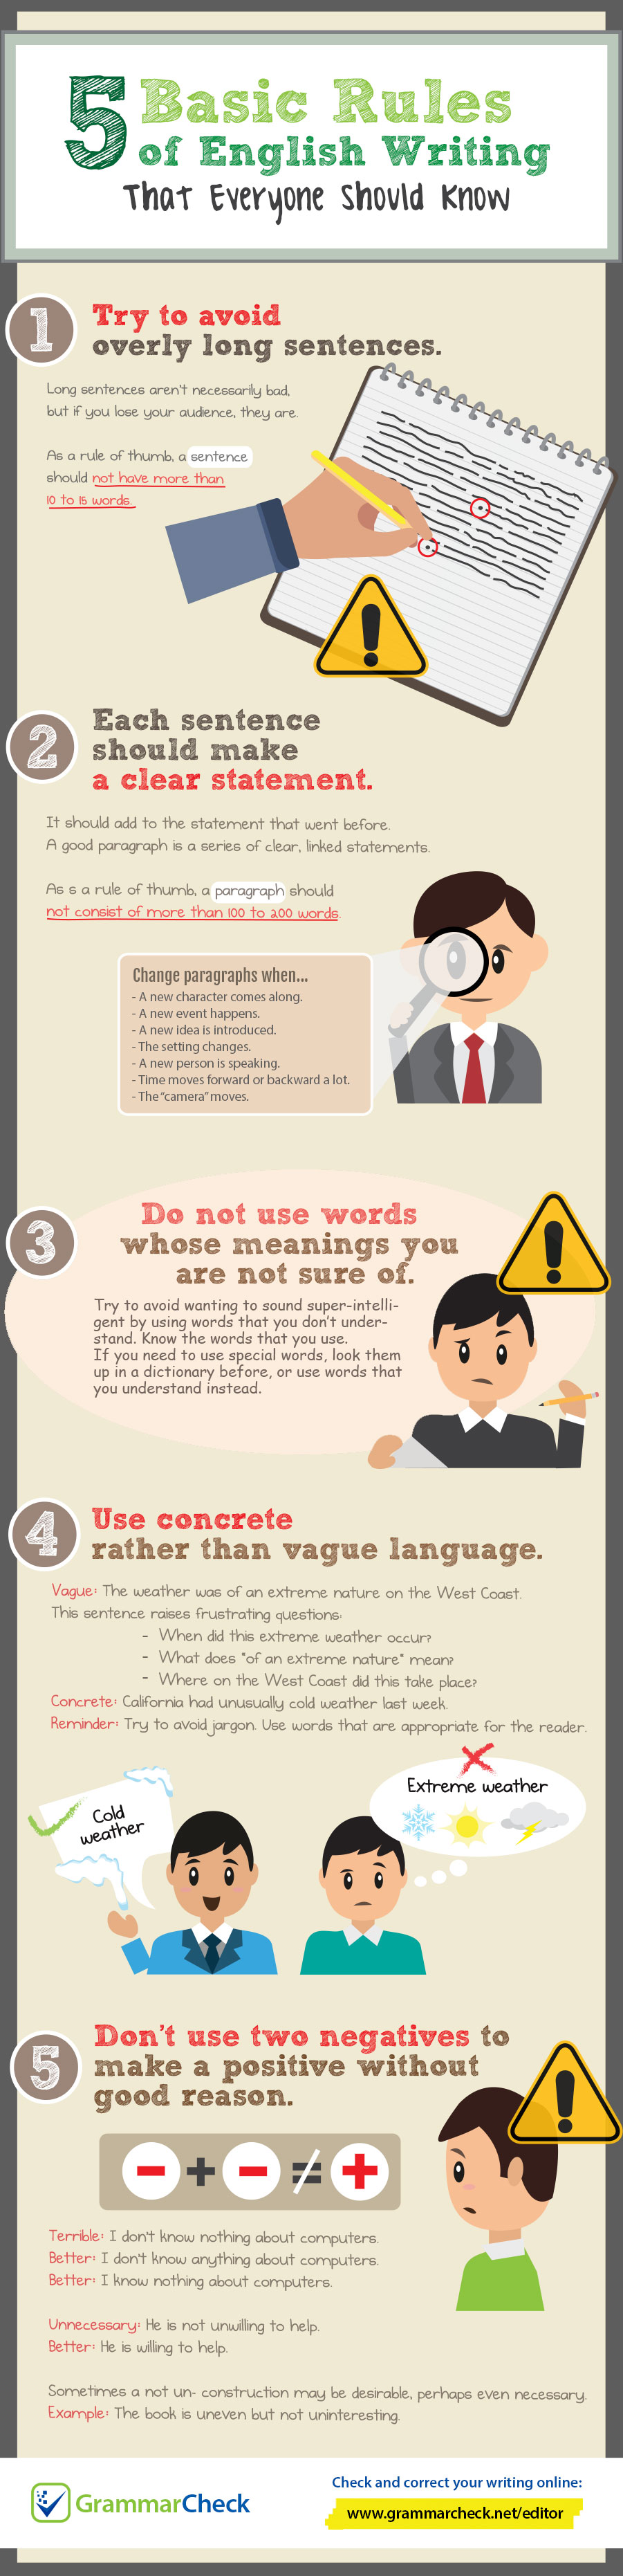 5 Basic Rules of English Writing That Everyone Should Know (Infographic)